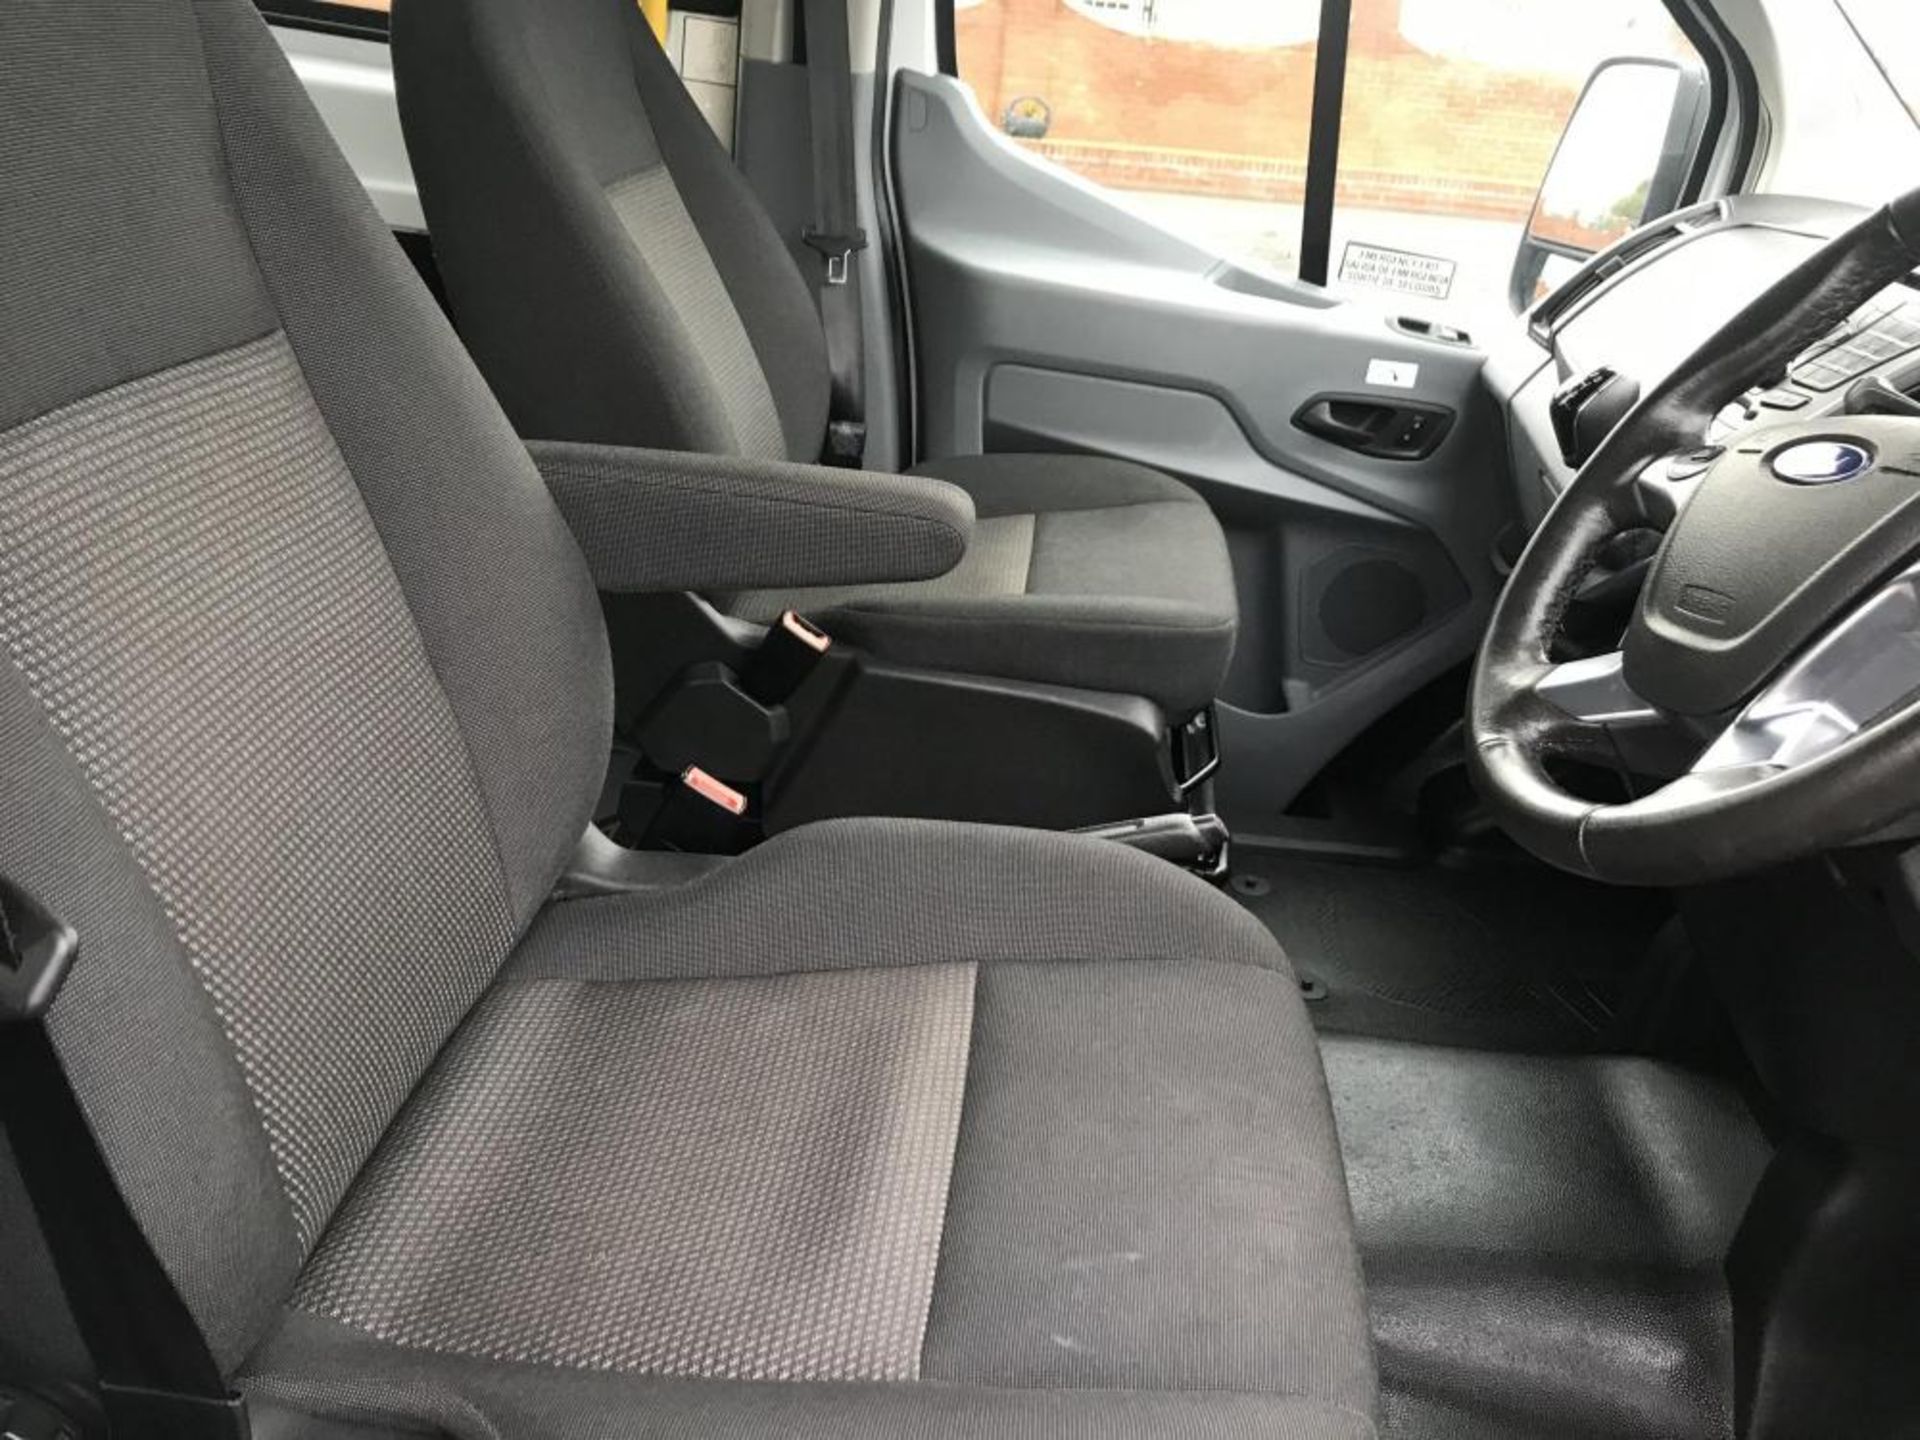 2017/17 REG FORD TRANSIT 460 ECONETIC TECH 2.2 DIESEL WHITE 17 SEAT MINIBUS, SHOWING 0 FORMER KEEPER - Image 8 of 17